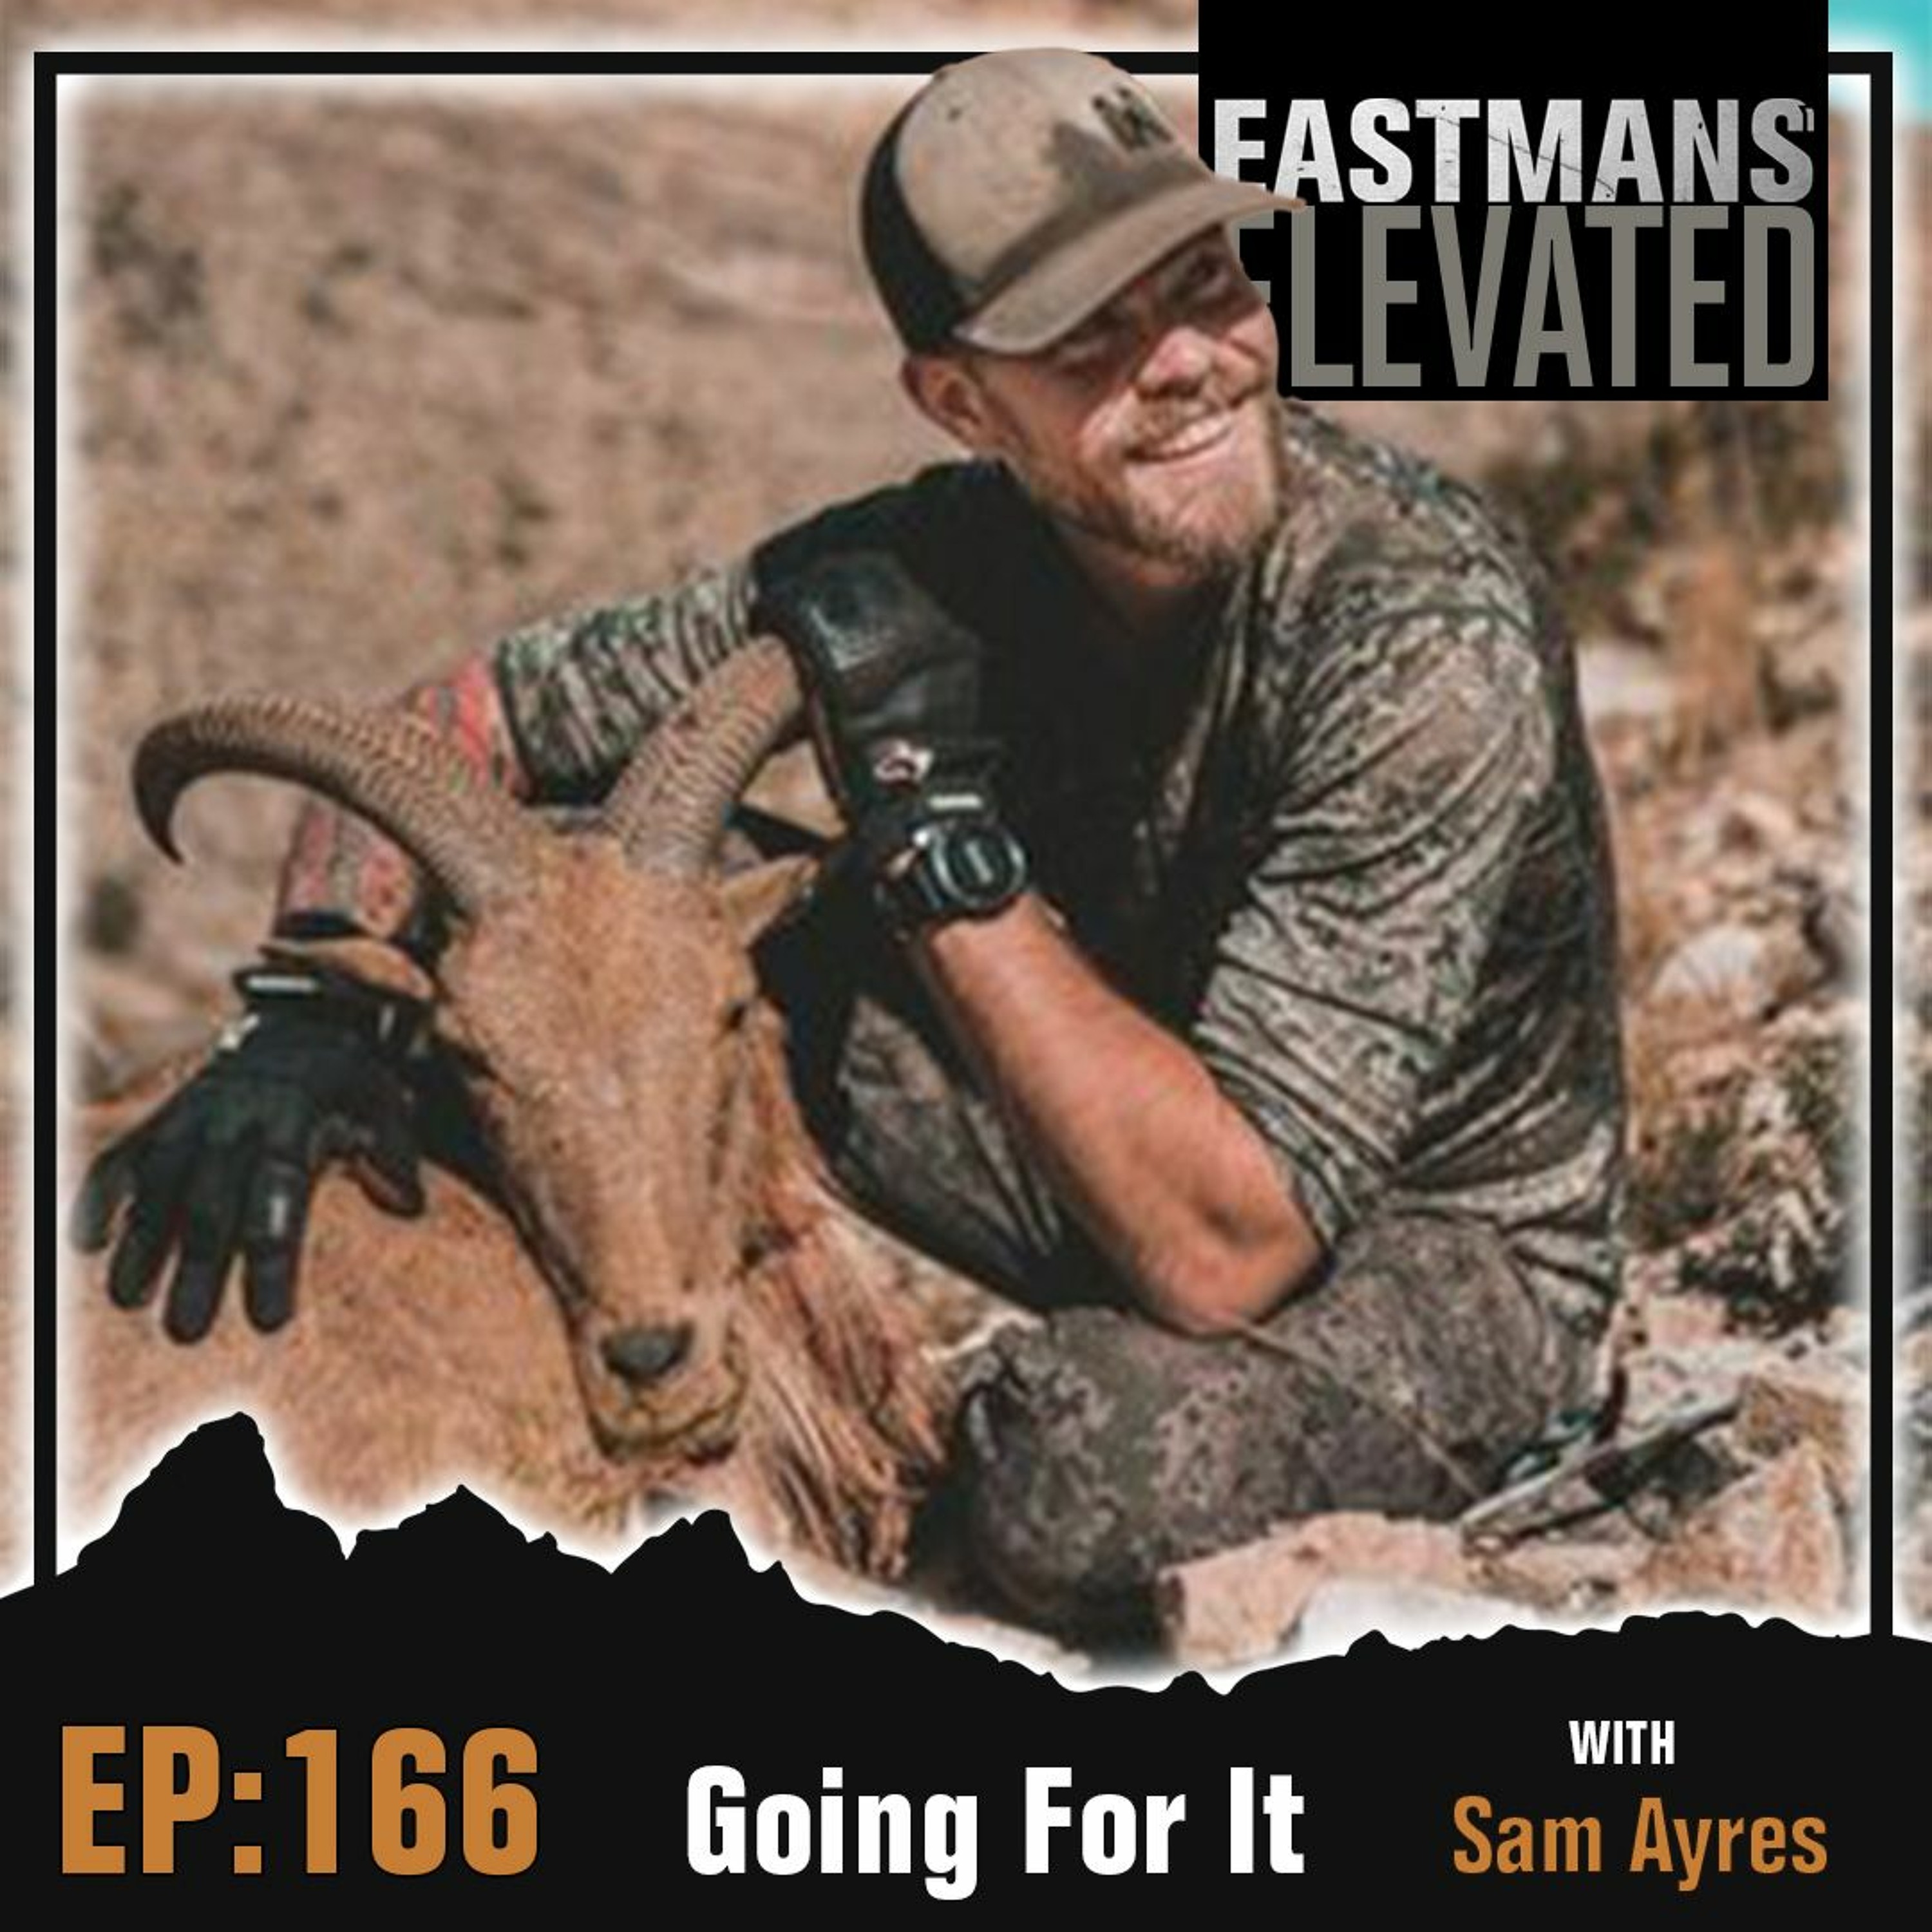 Episode 166- Going for It with Sam Ayres